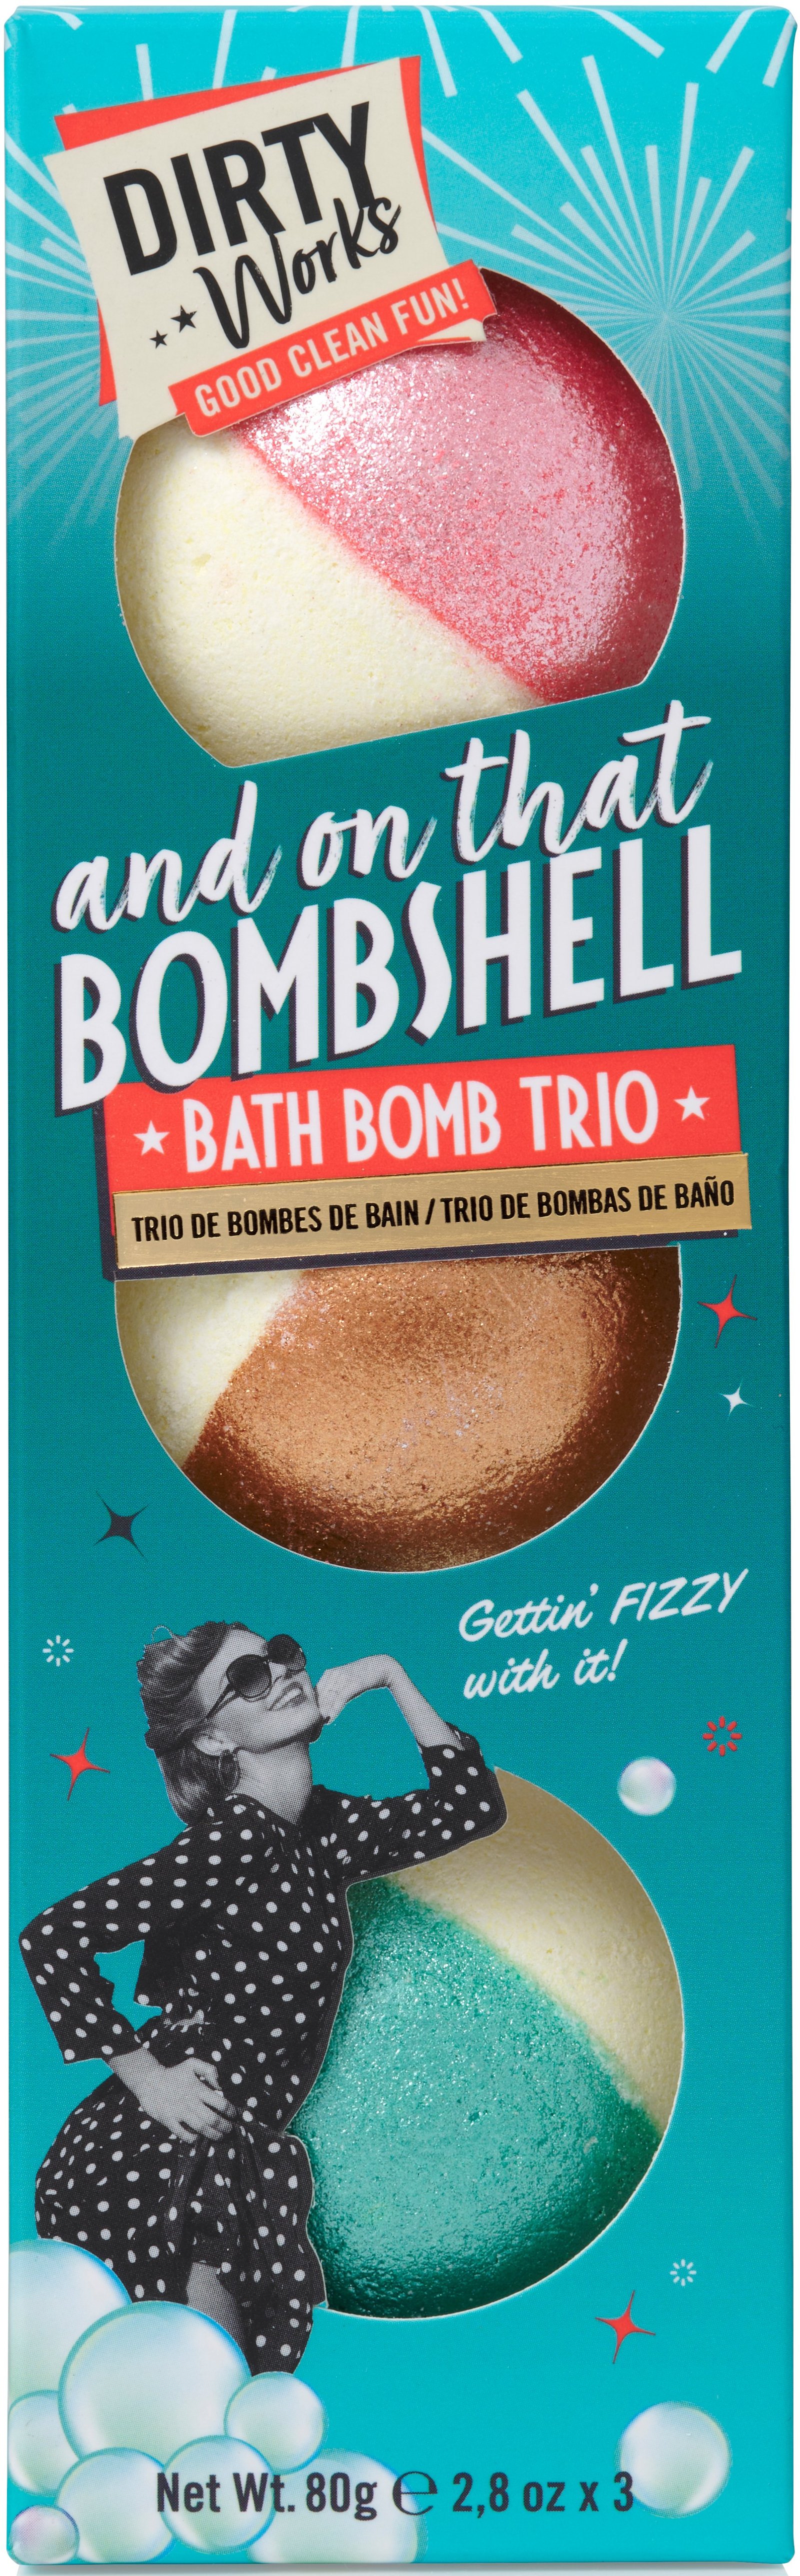 Dirty Works And On That Bombshell Bath Bomb Trio 3 x 80 g